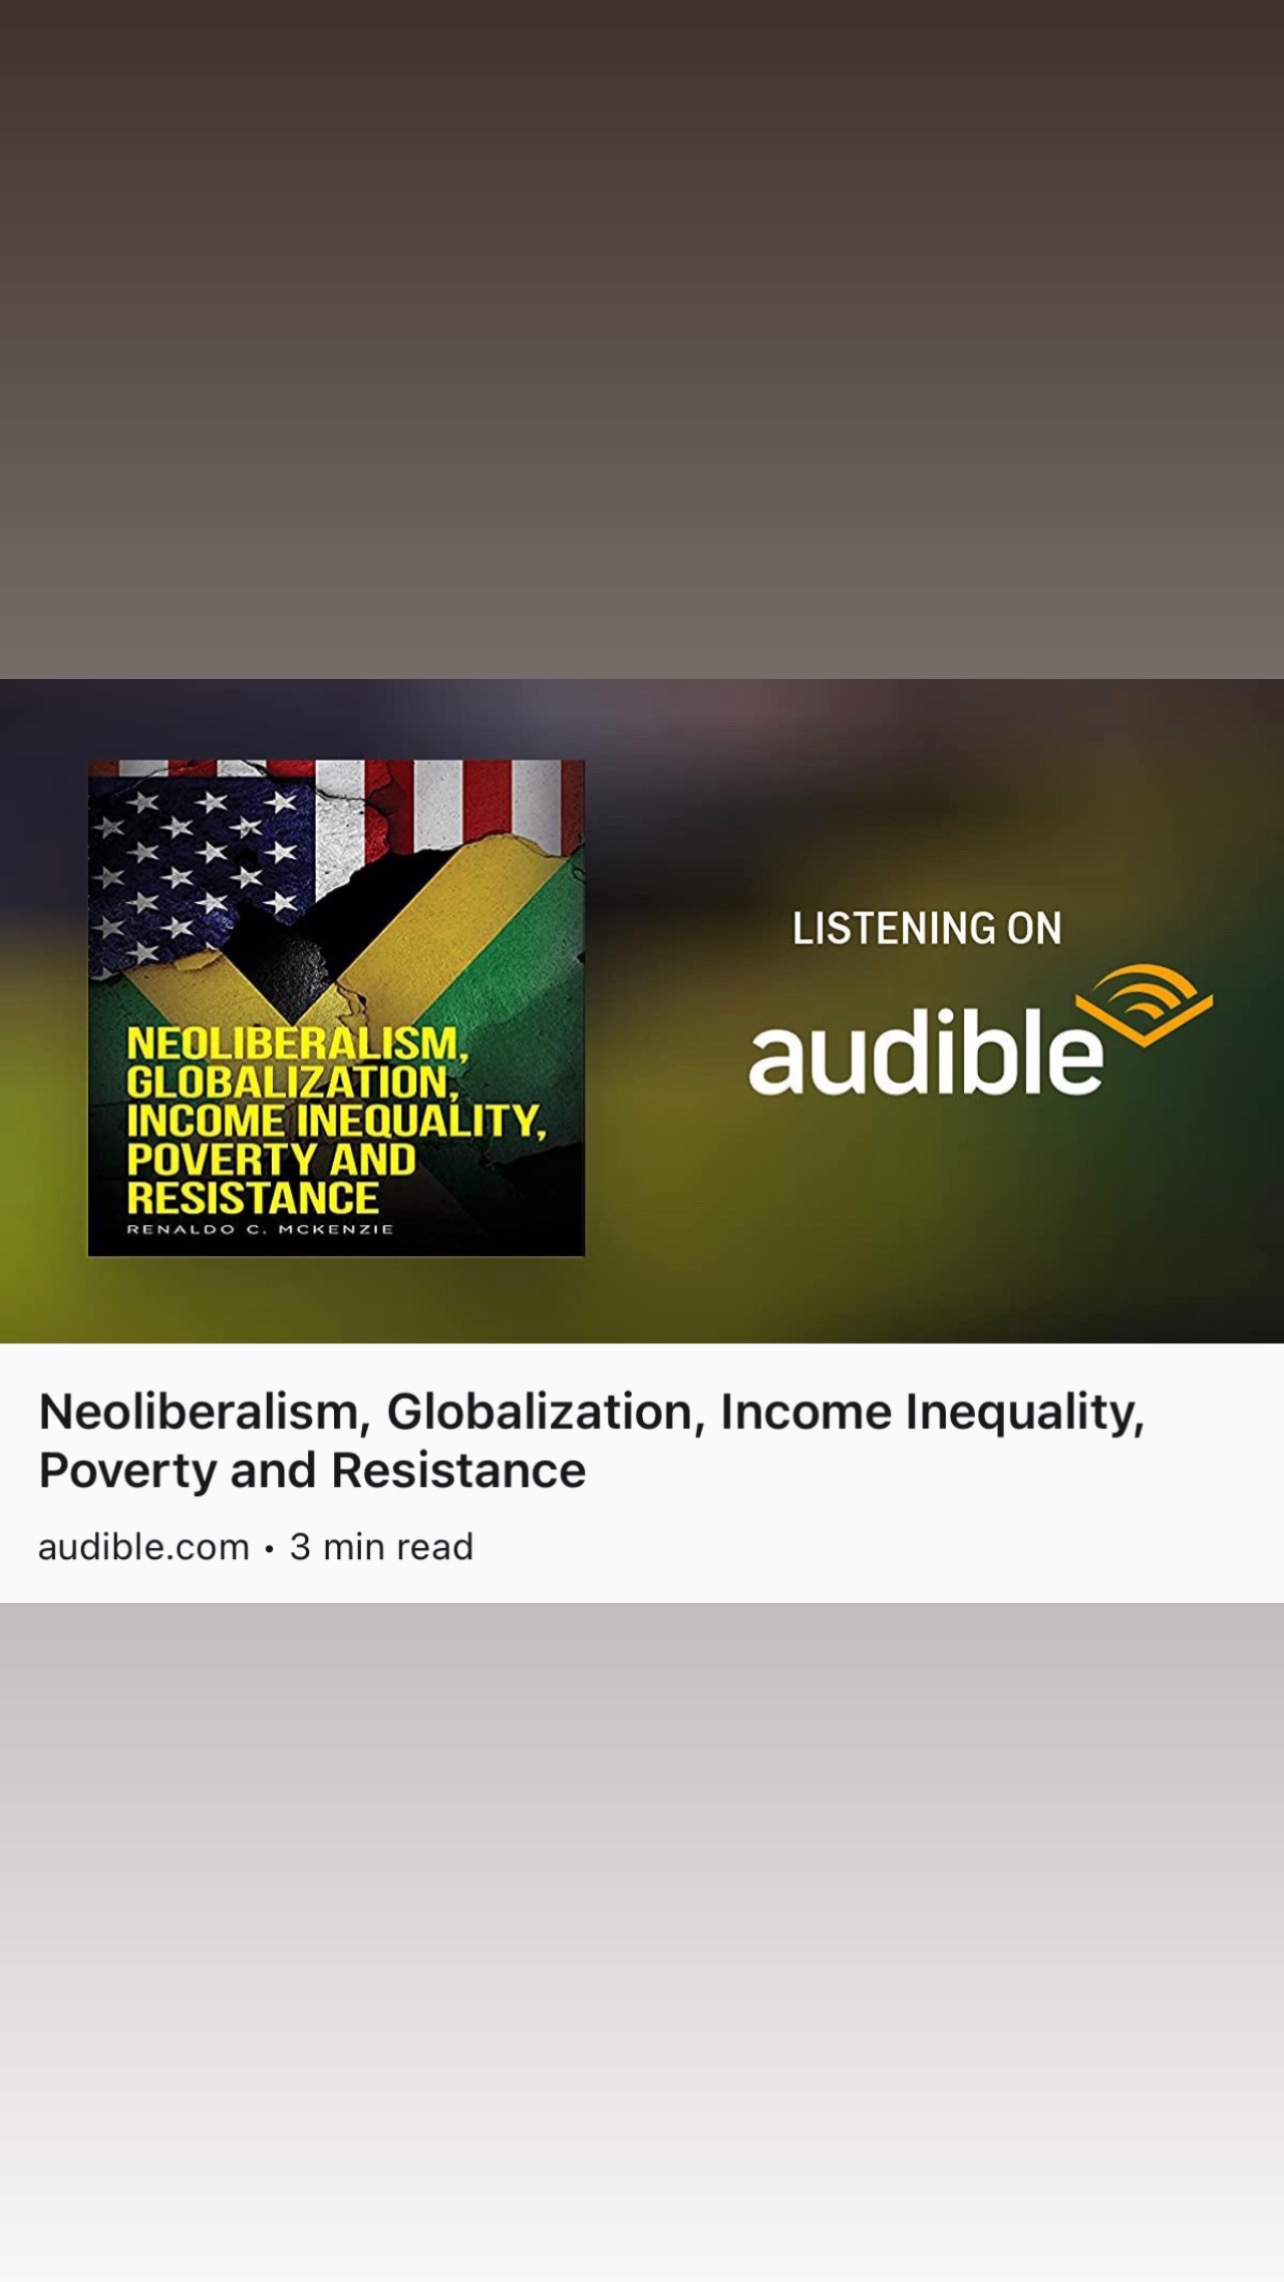 Announcing: Our published book Neoliberalism is Now available in Audio on the Audible, ITunes etc.